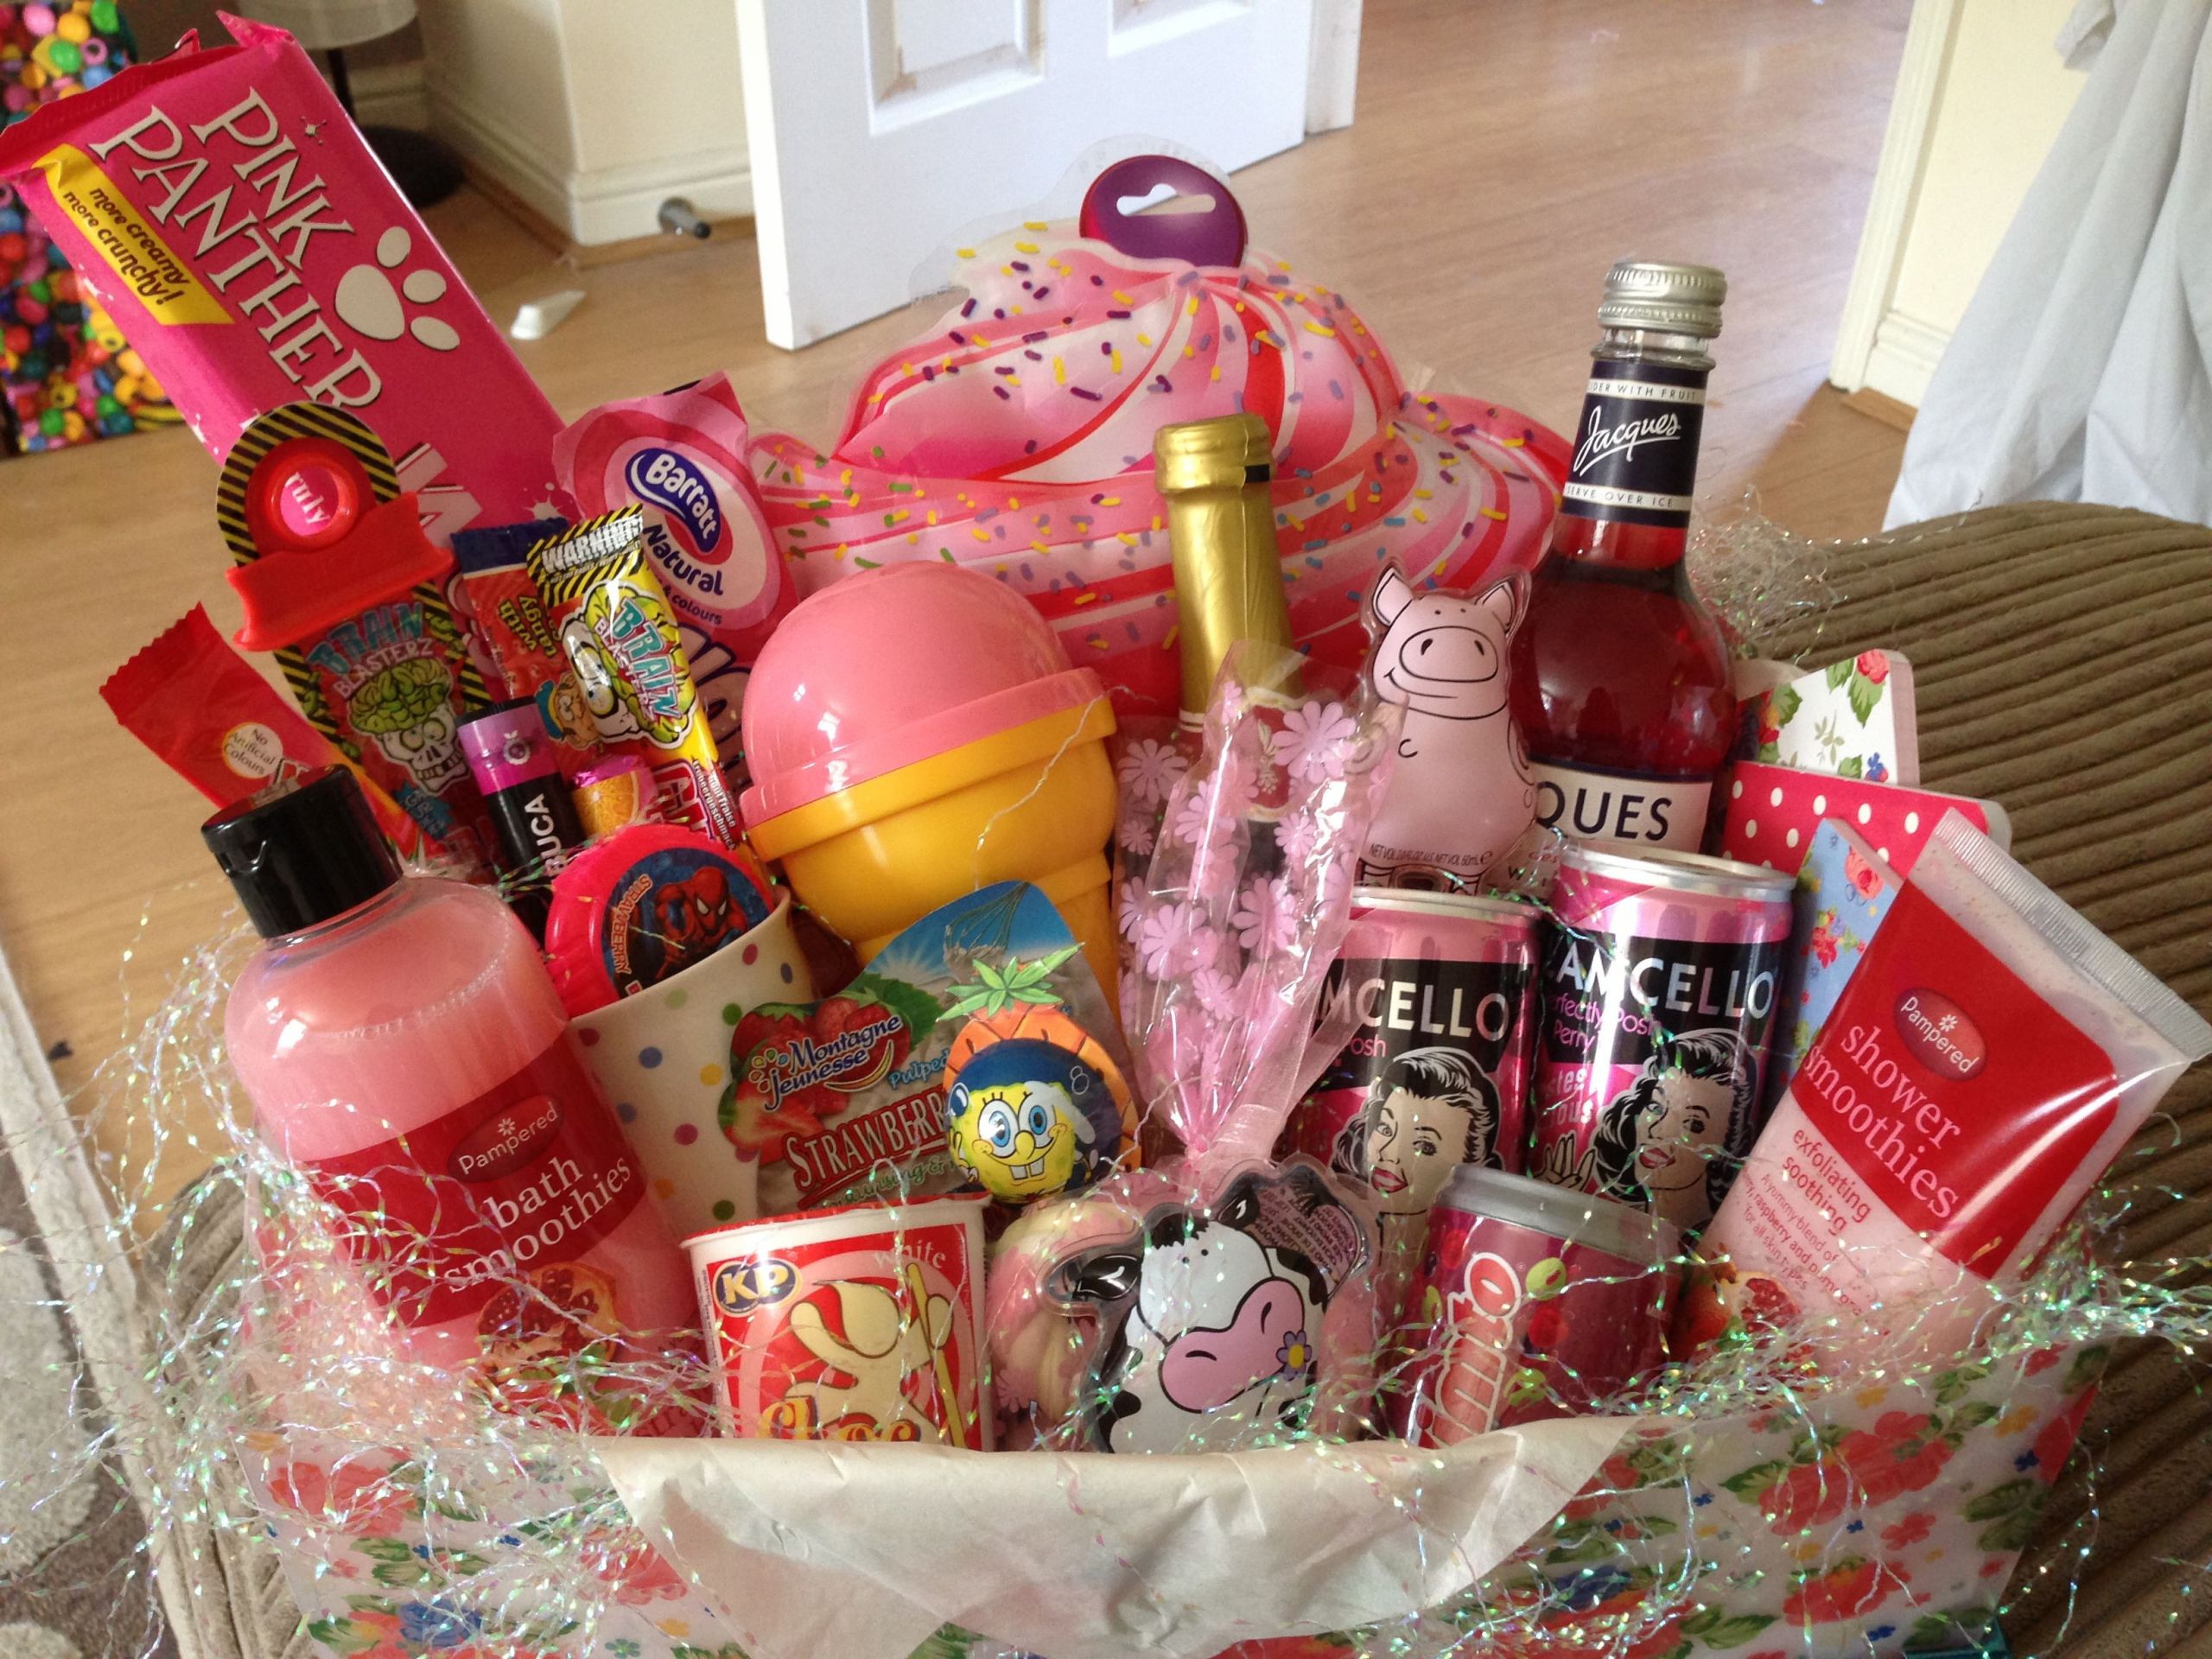 Girls Night Gift Ideas
 Girly hamper for girls night in Given to a good friend